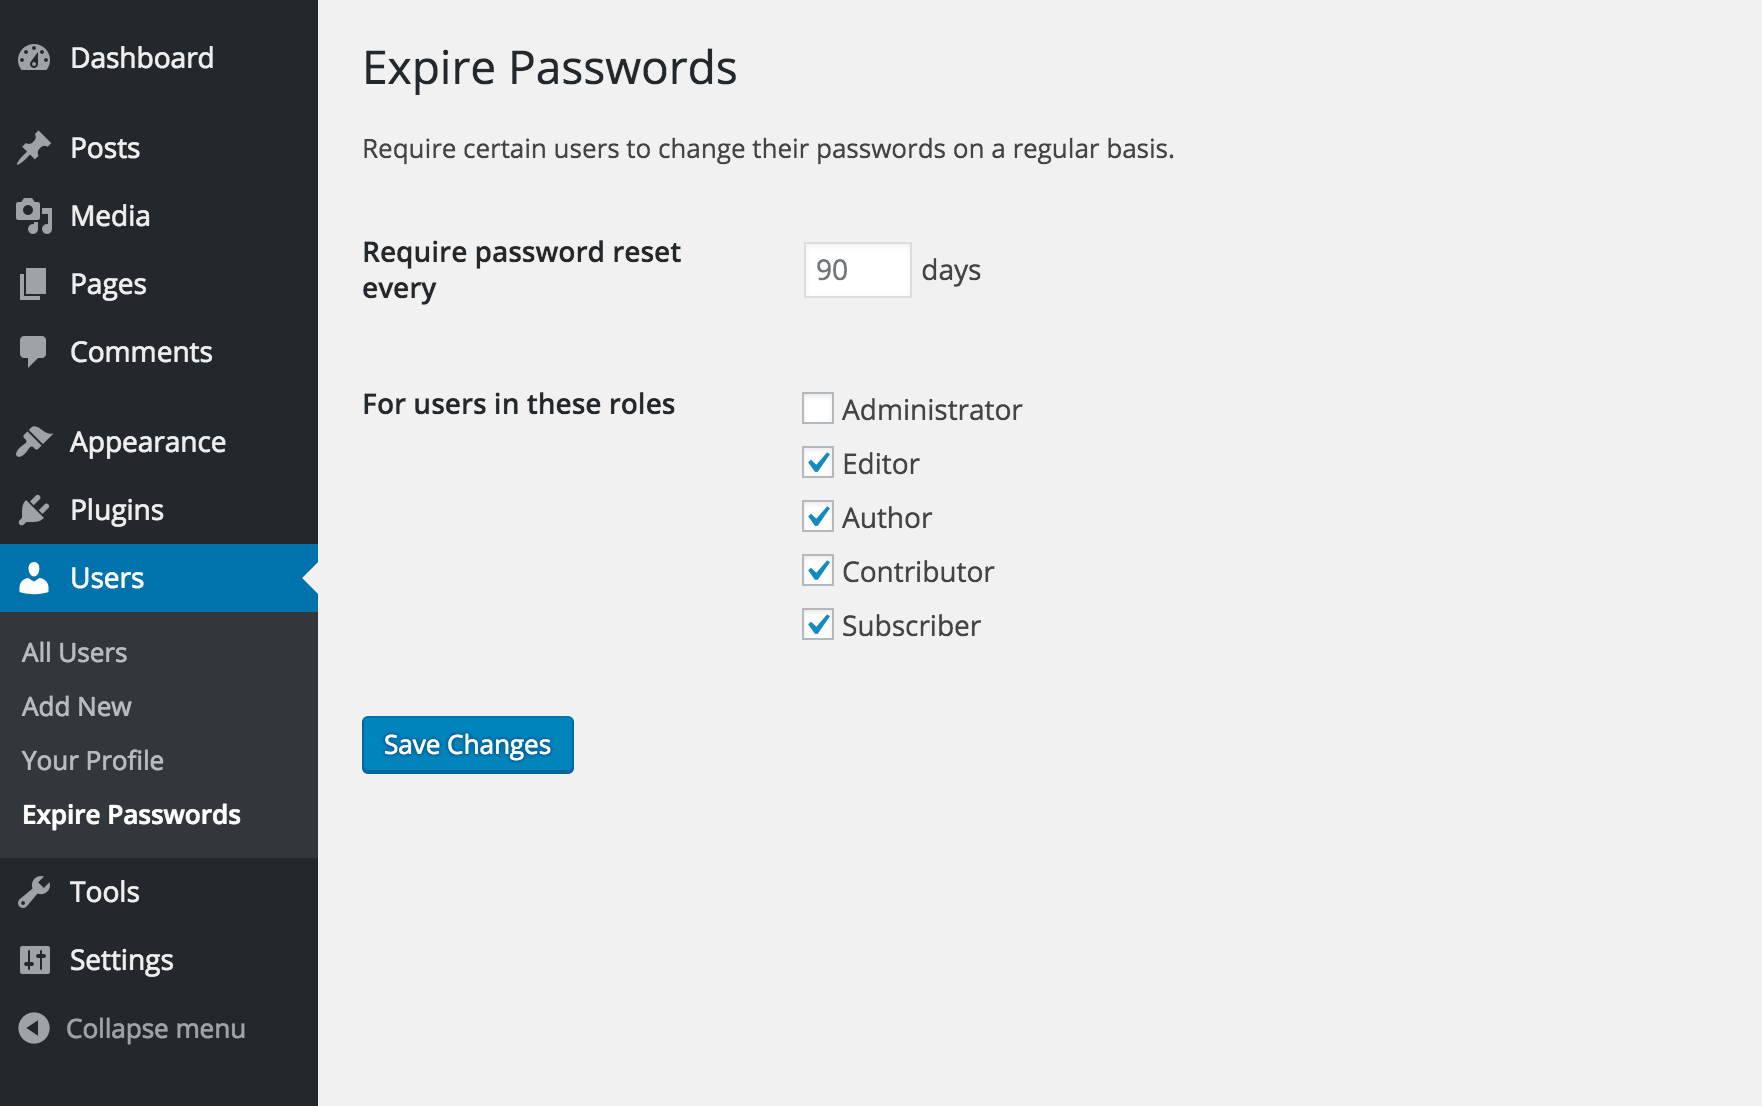 Configure which user roles should be required to regularly reset their passwords and how often.